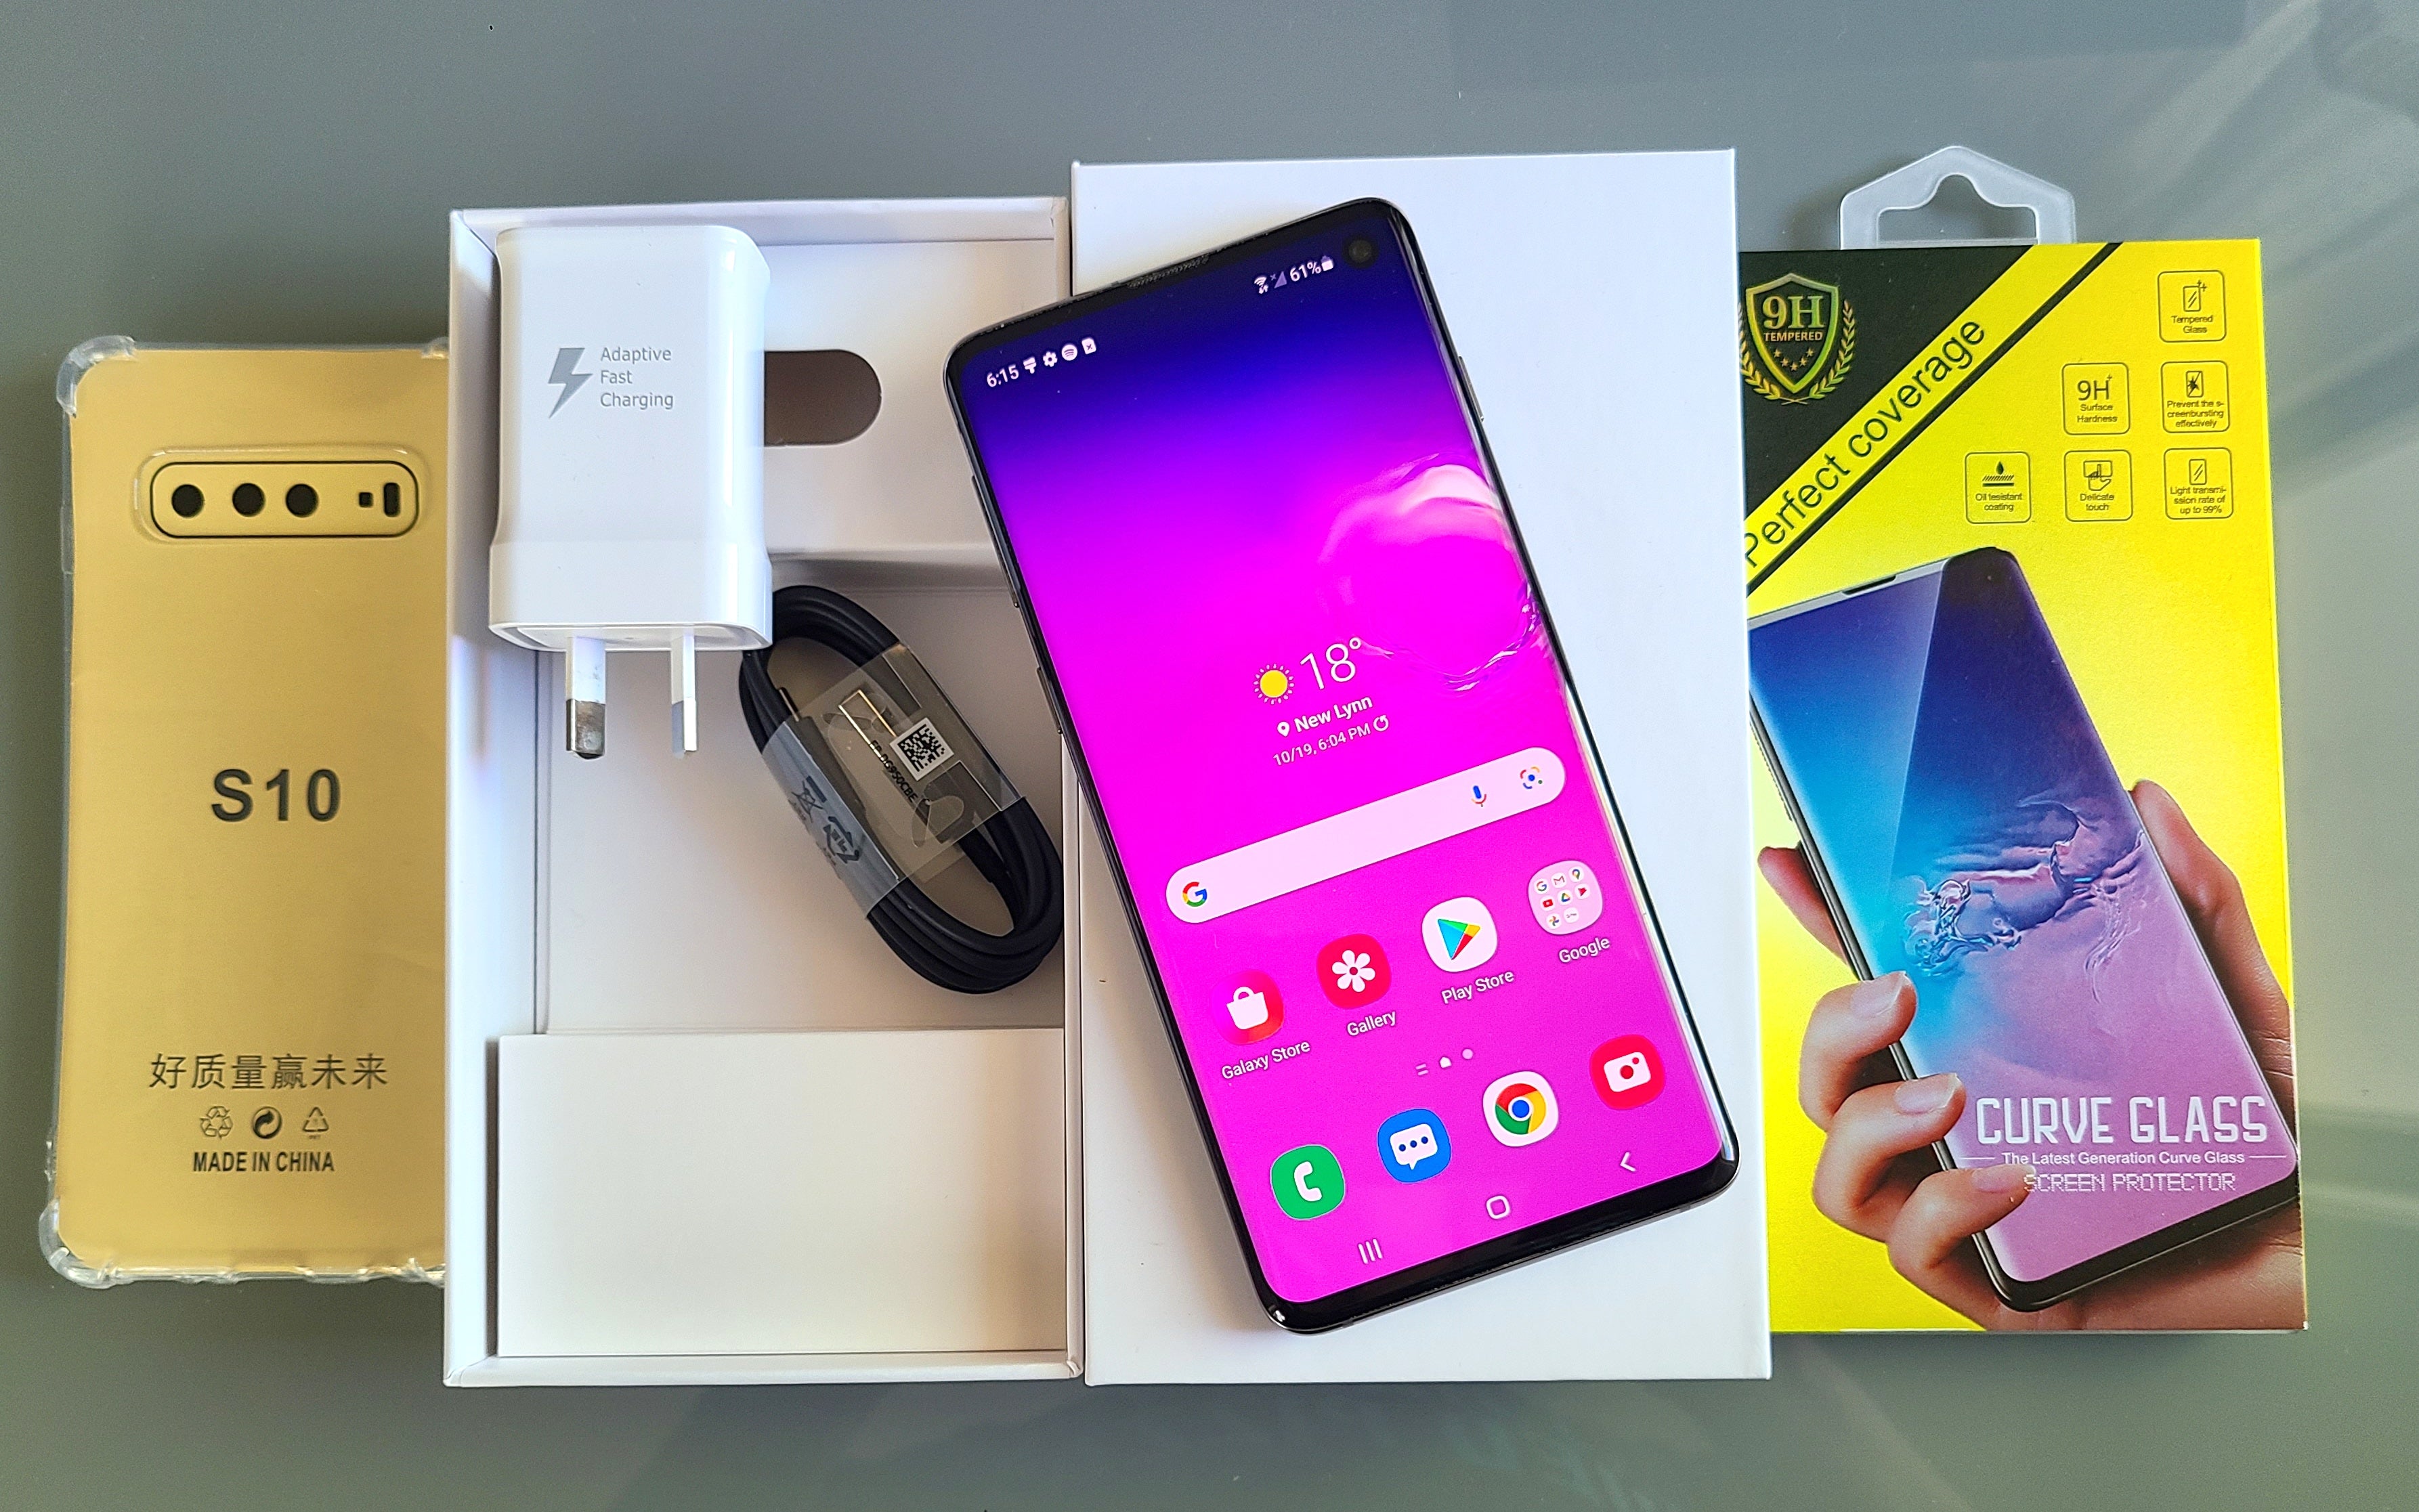 Samsung Galaxy S10 128GB 8GB Prism Black (Like New) With New Case, Glass Screen Protector & Shipping